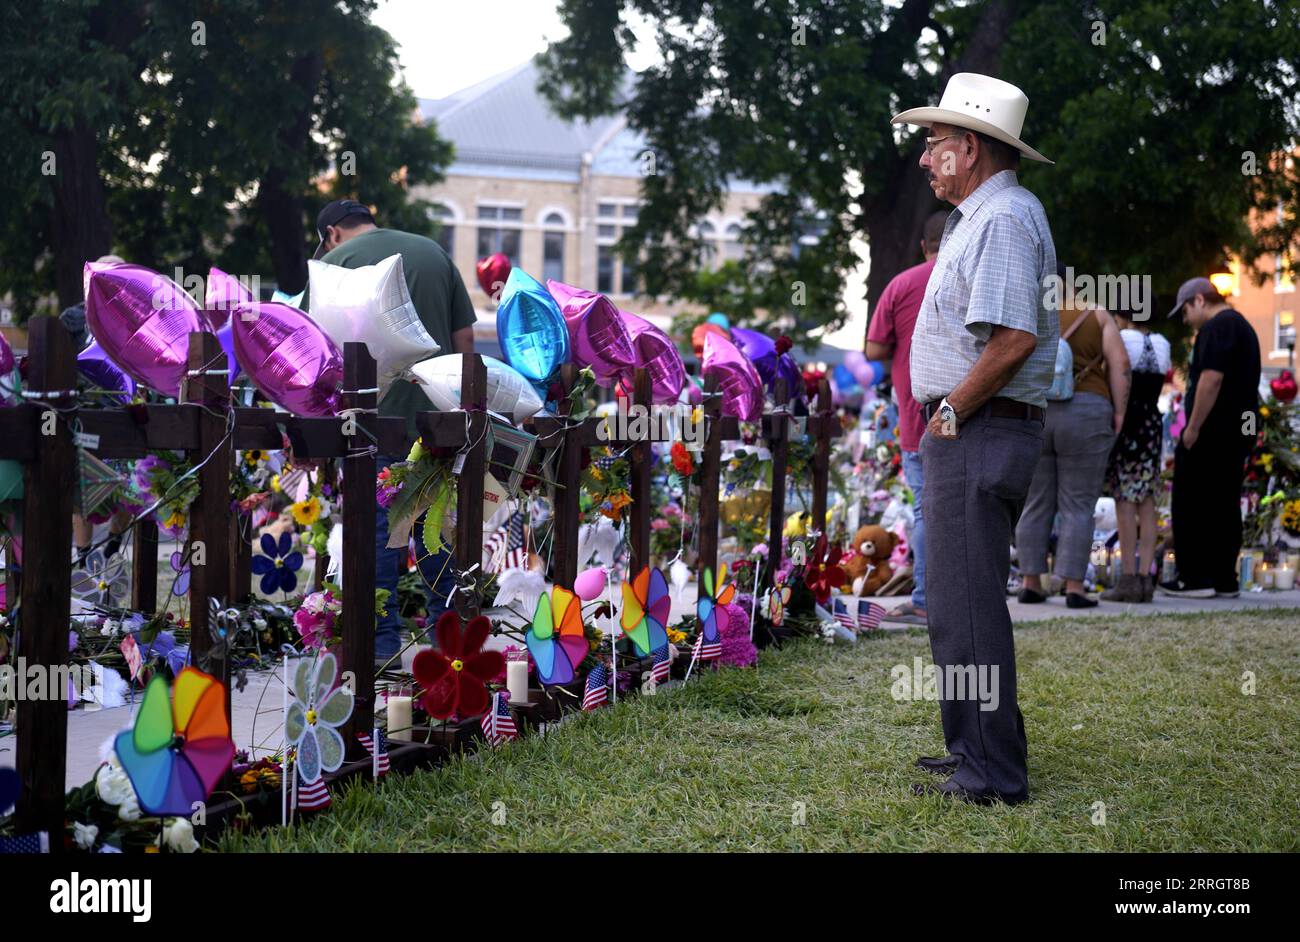 220531 -- UVALDE, May 31, 2022 -- People mourn for victims of a school mass shooting at Town Square in Uvalde, Texas, the United States, May 30, 2022. At least 19 children and two adults were killed in a shooting at Robb Elementary School in the town of Uvalde, Texas, on May 24.  U.S.-TEXAS-UVALDE-MASS SHOOTING-MOURNING WuxXiaoling PUBLICATIONxNOTxINxCHN Stock Photo